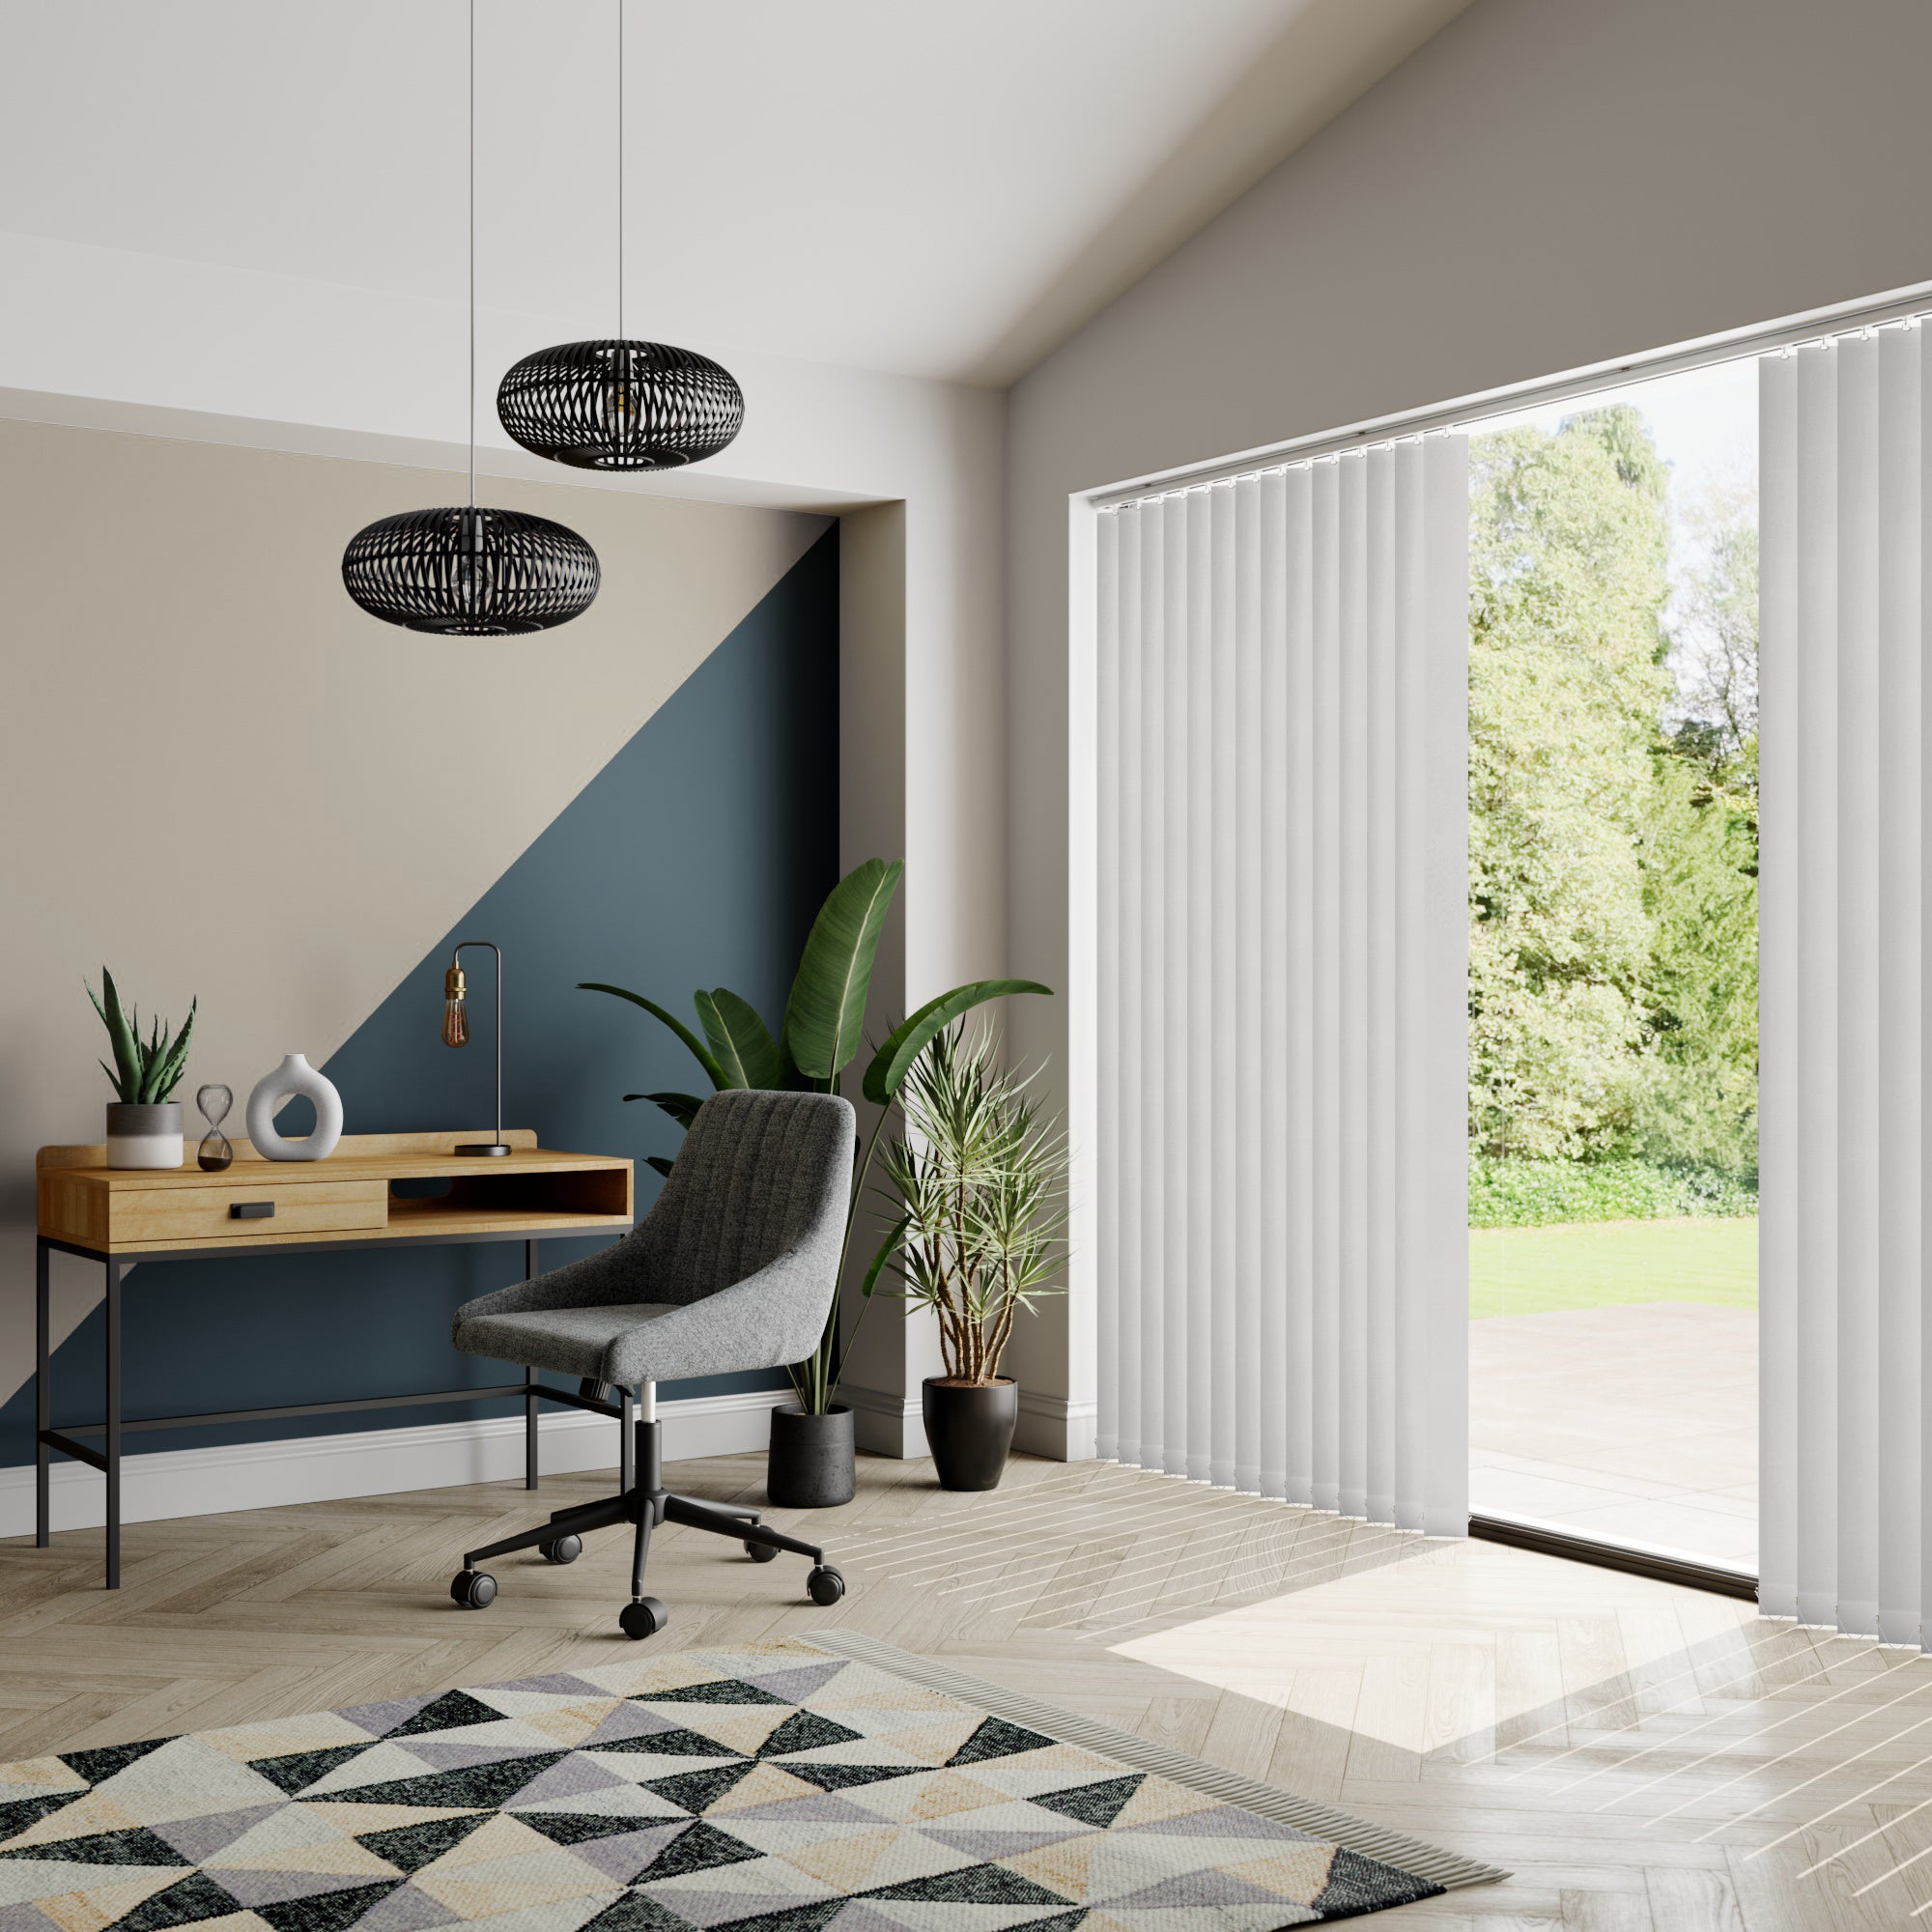 Unilux Made to Measure Vertical Blind Unilux Grey